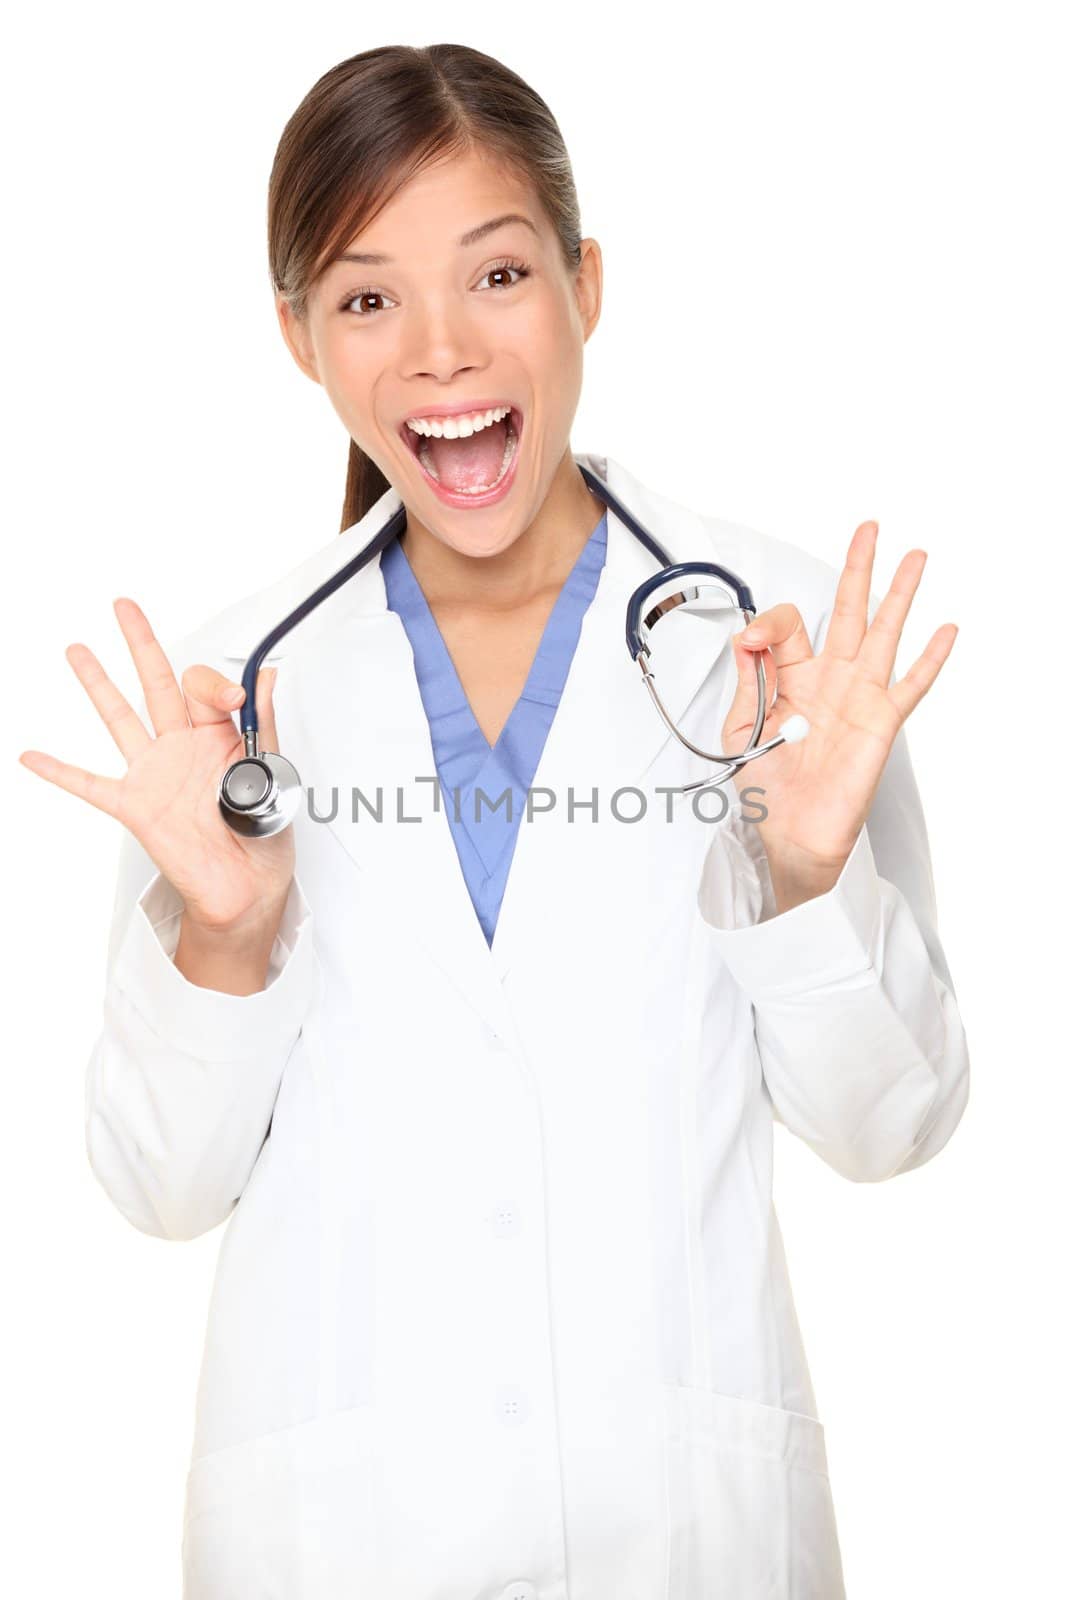 Medical student or young doctor showing her stethoscope happy and cheerful. Mixed Asian / Caucasian woman in her mid 20s.